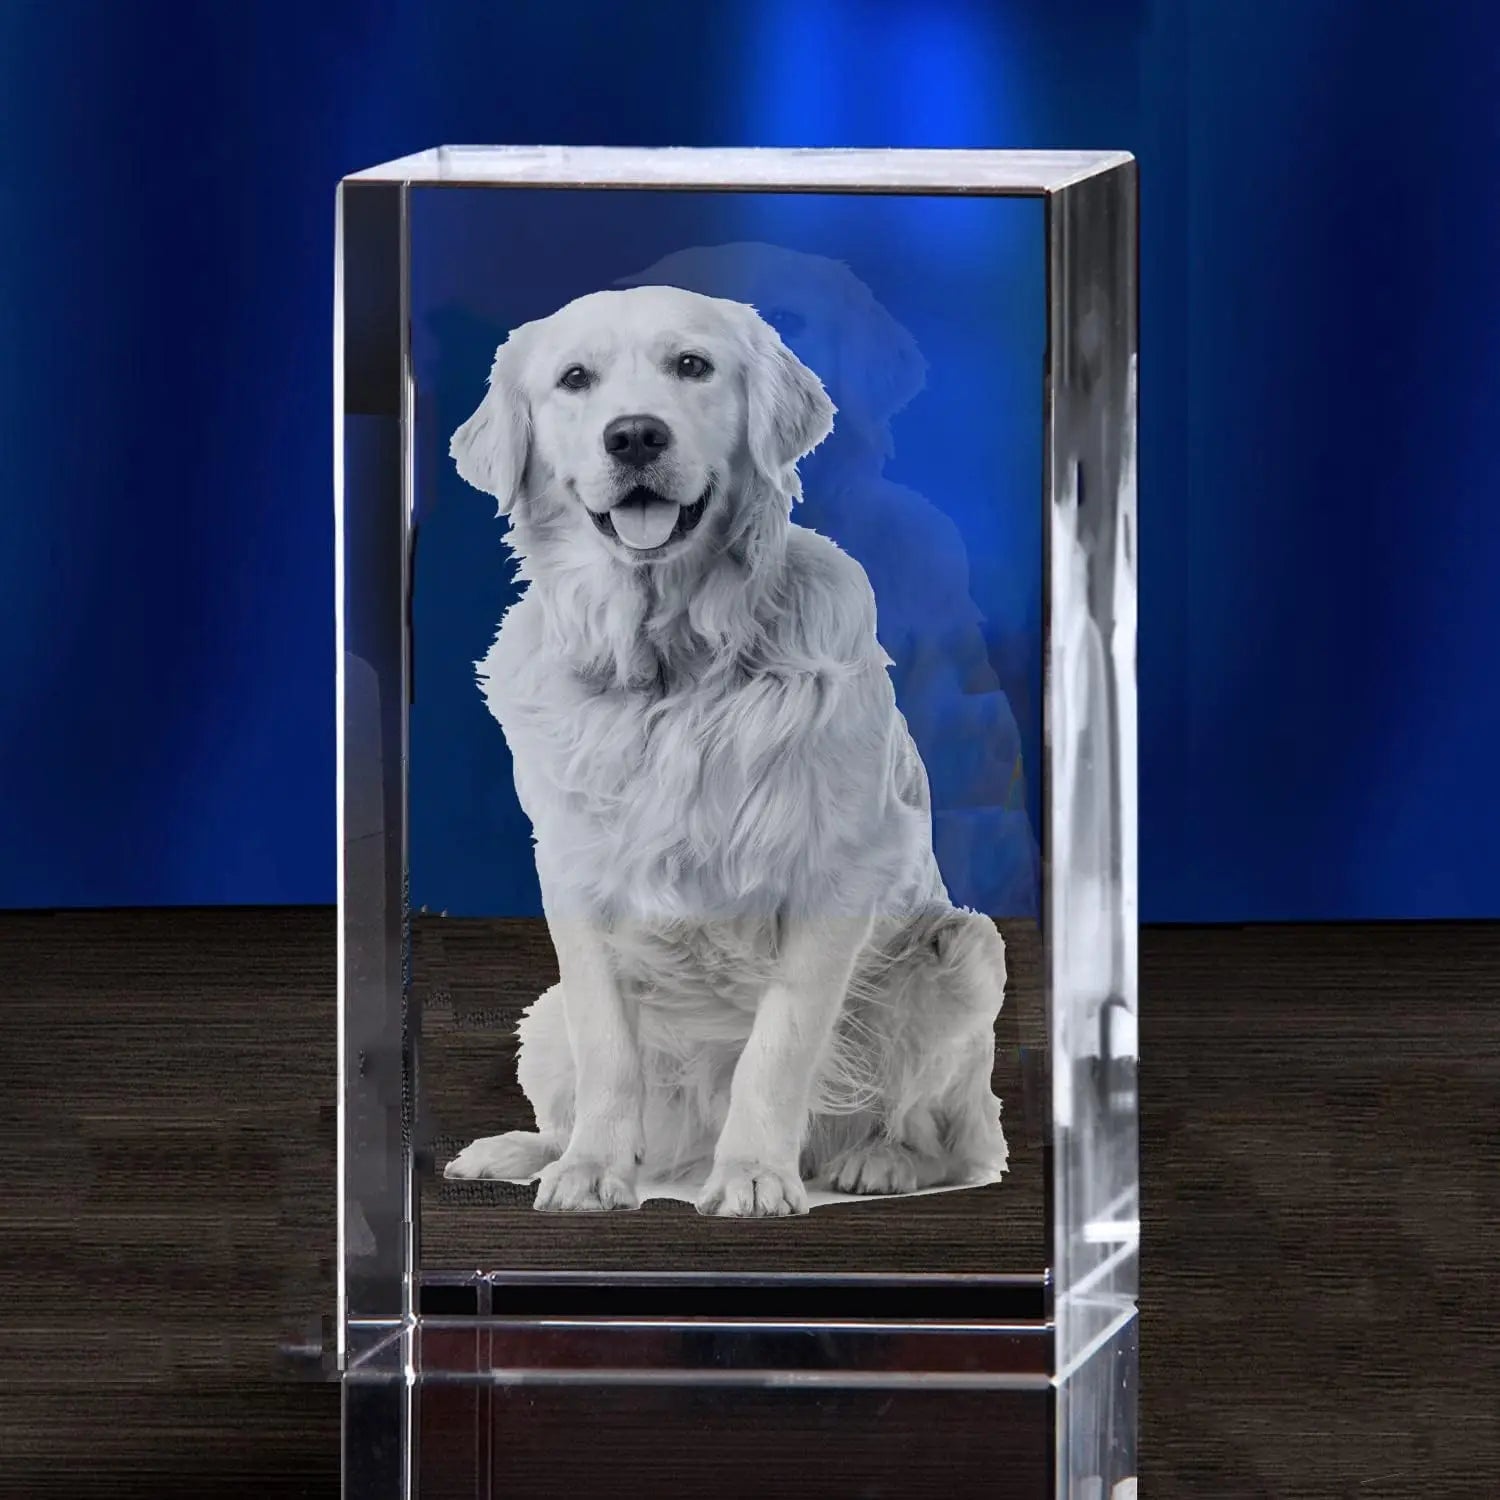 Personalized Sympathy Tribute - Custom Gift for the Loss of a Beloved Pet, Crystal Decor Keepsake Offering as a Memorial for the Departed Loved One 2D Crystal 1 / 5cmx5cmx8cm